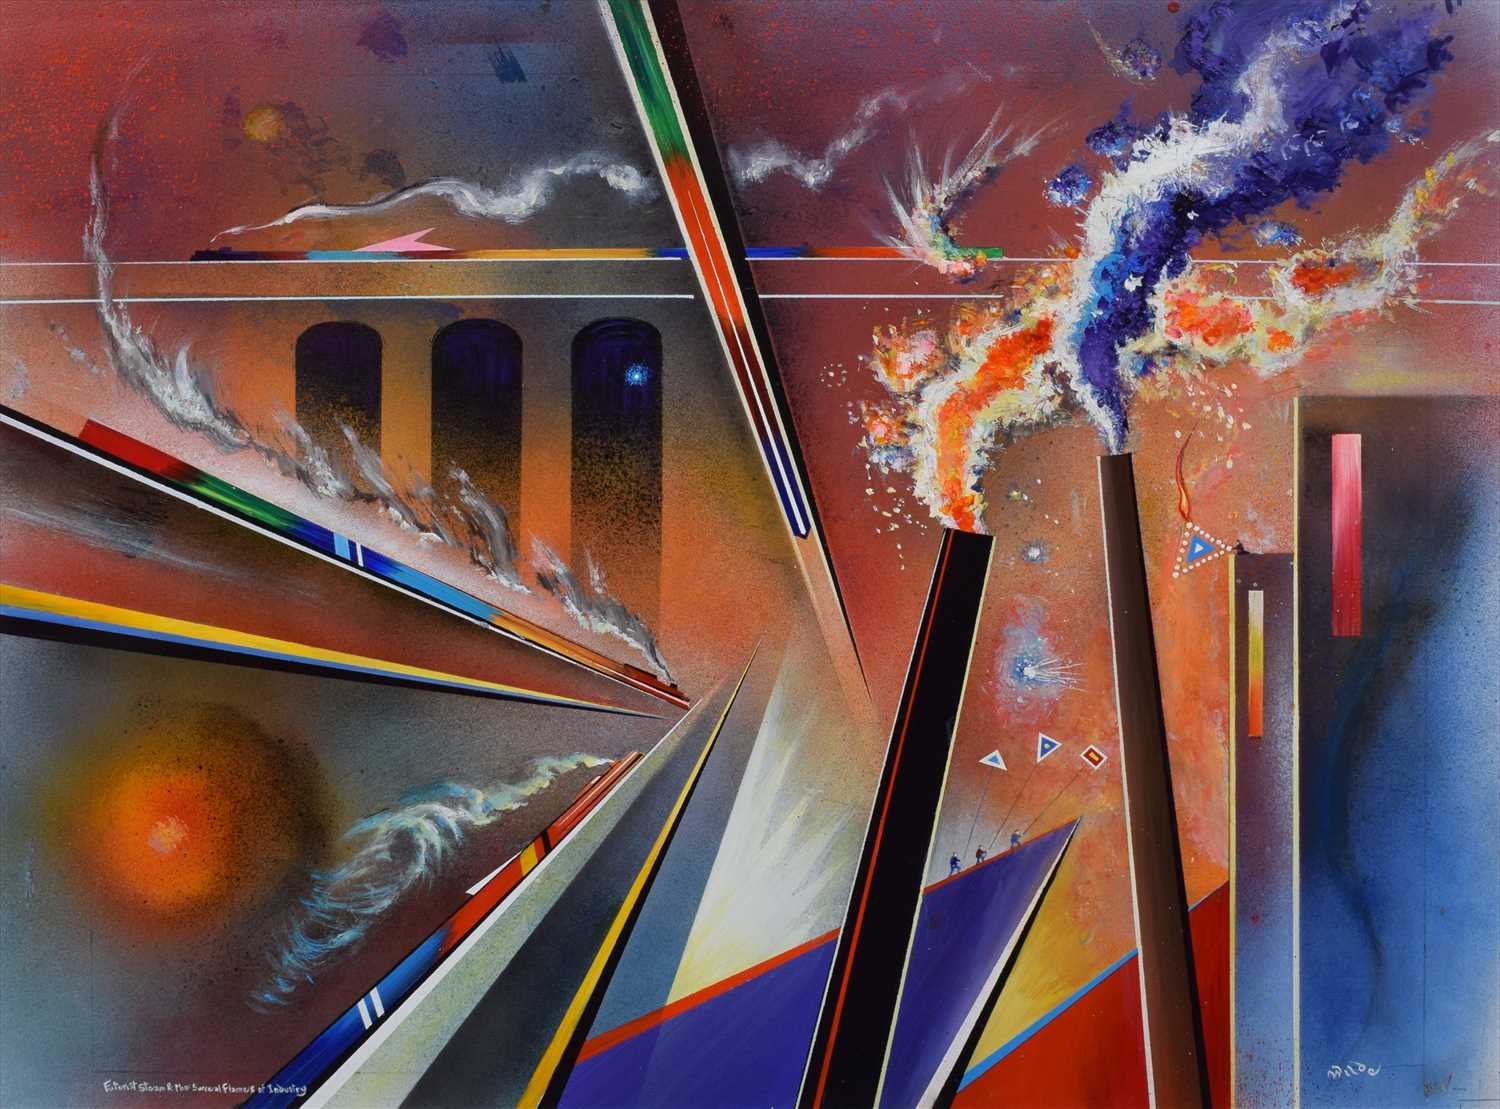 Lot 45 - David Wilde, "Futon St. Steam and the Surreal Flames of Industry", acrylic.